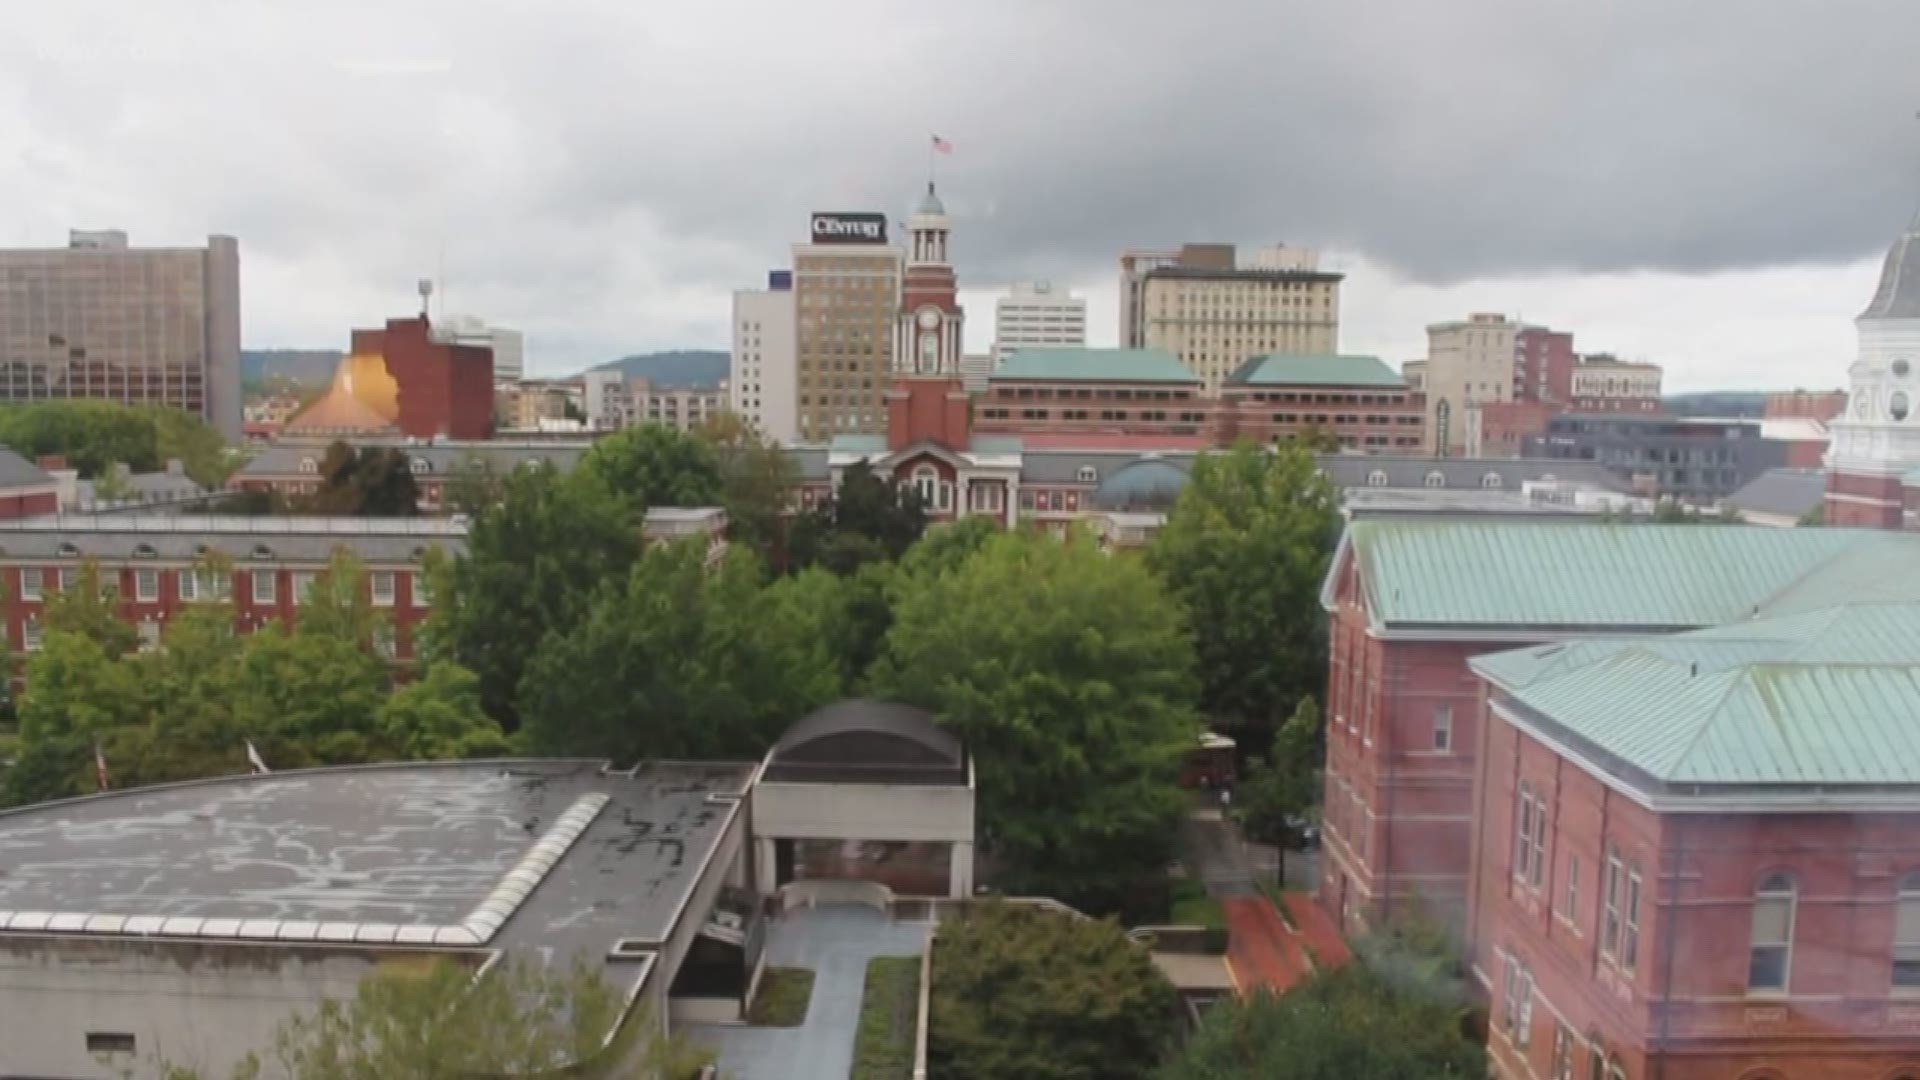 Recode Knoxville will affect all 73,000 properties in the City of Knoxville.